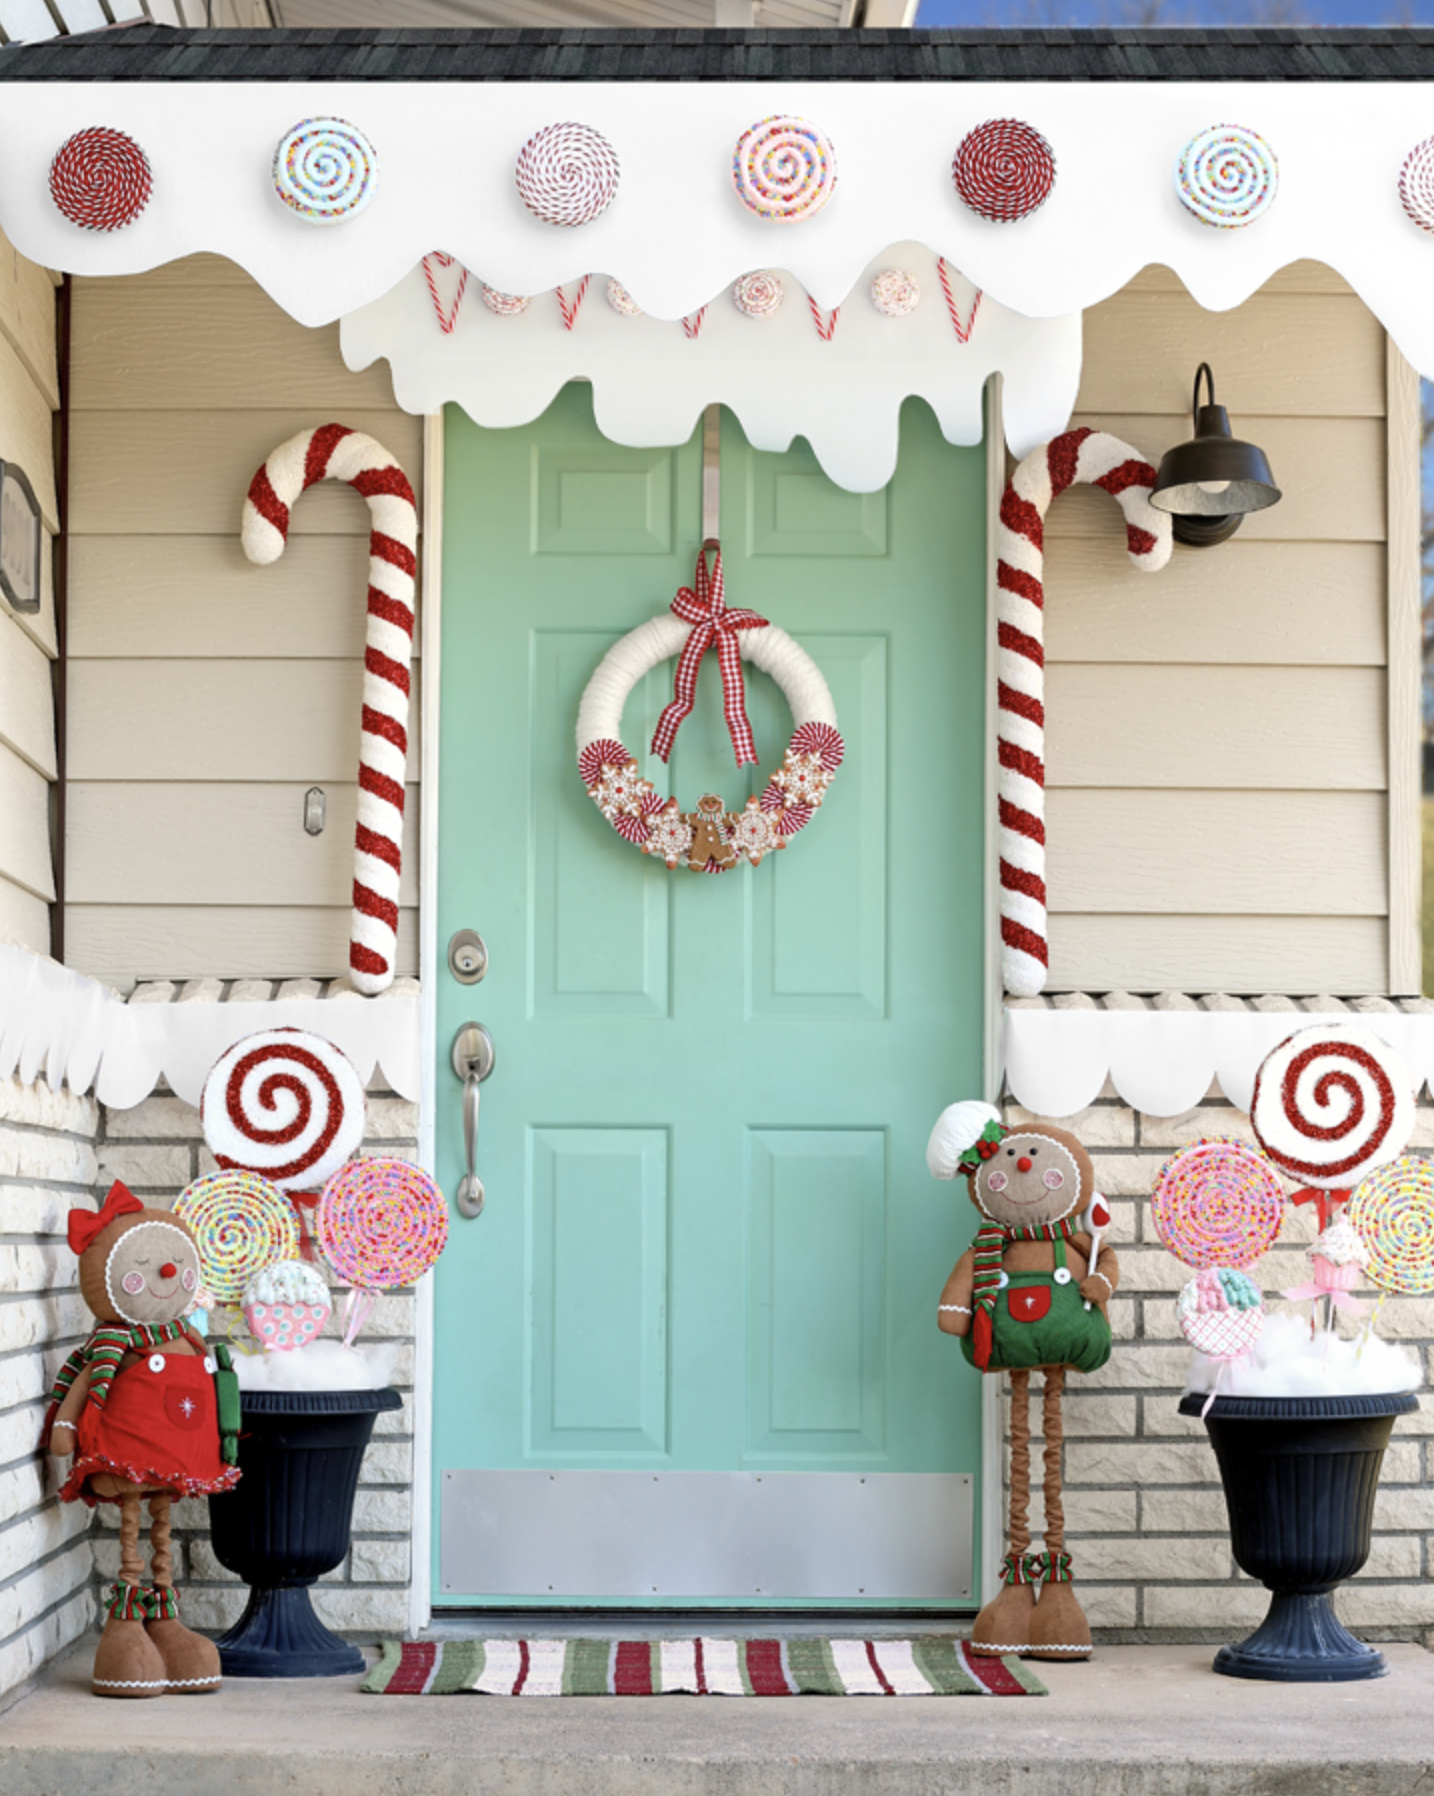 https://hips.hearstapps.com/hmg-prod/images/christmas-door-decorations-gingerbread-house-6526d6adacb95.png